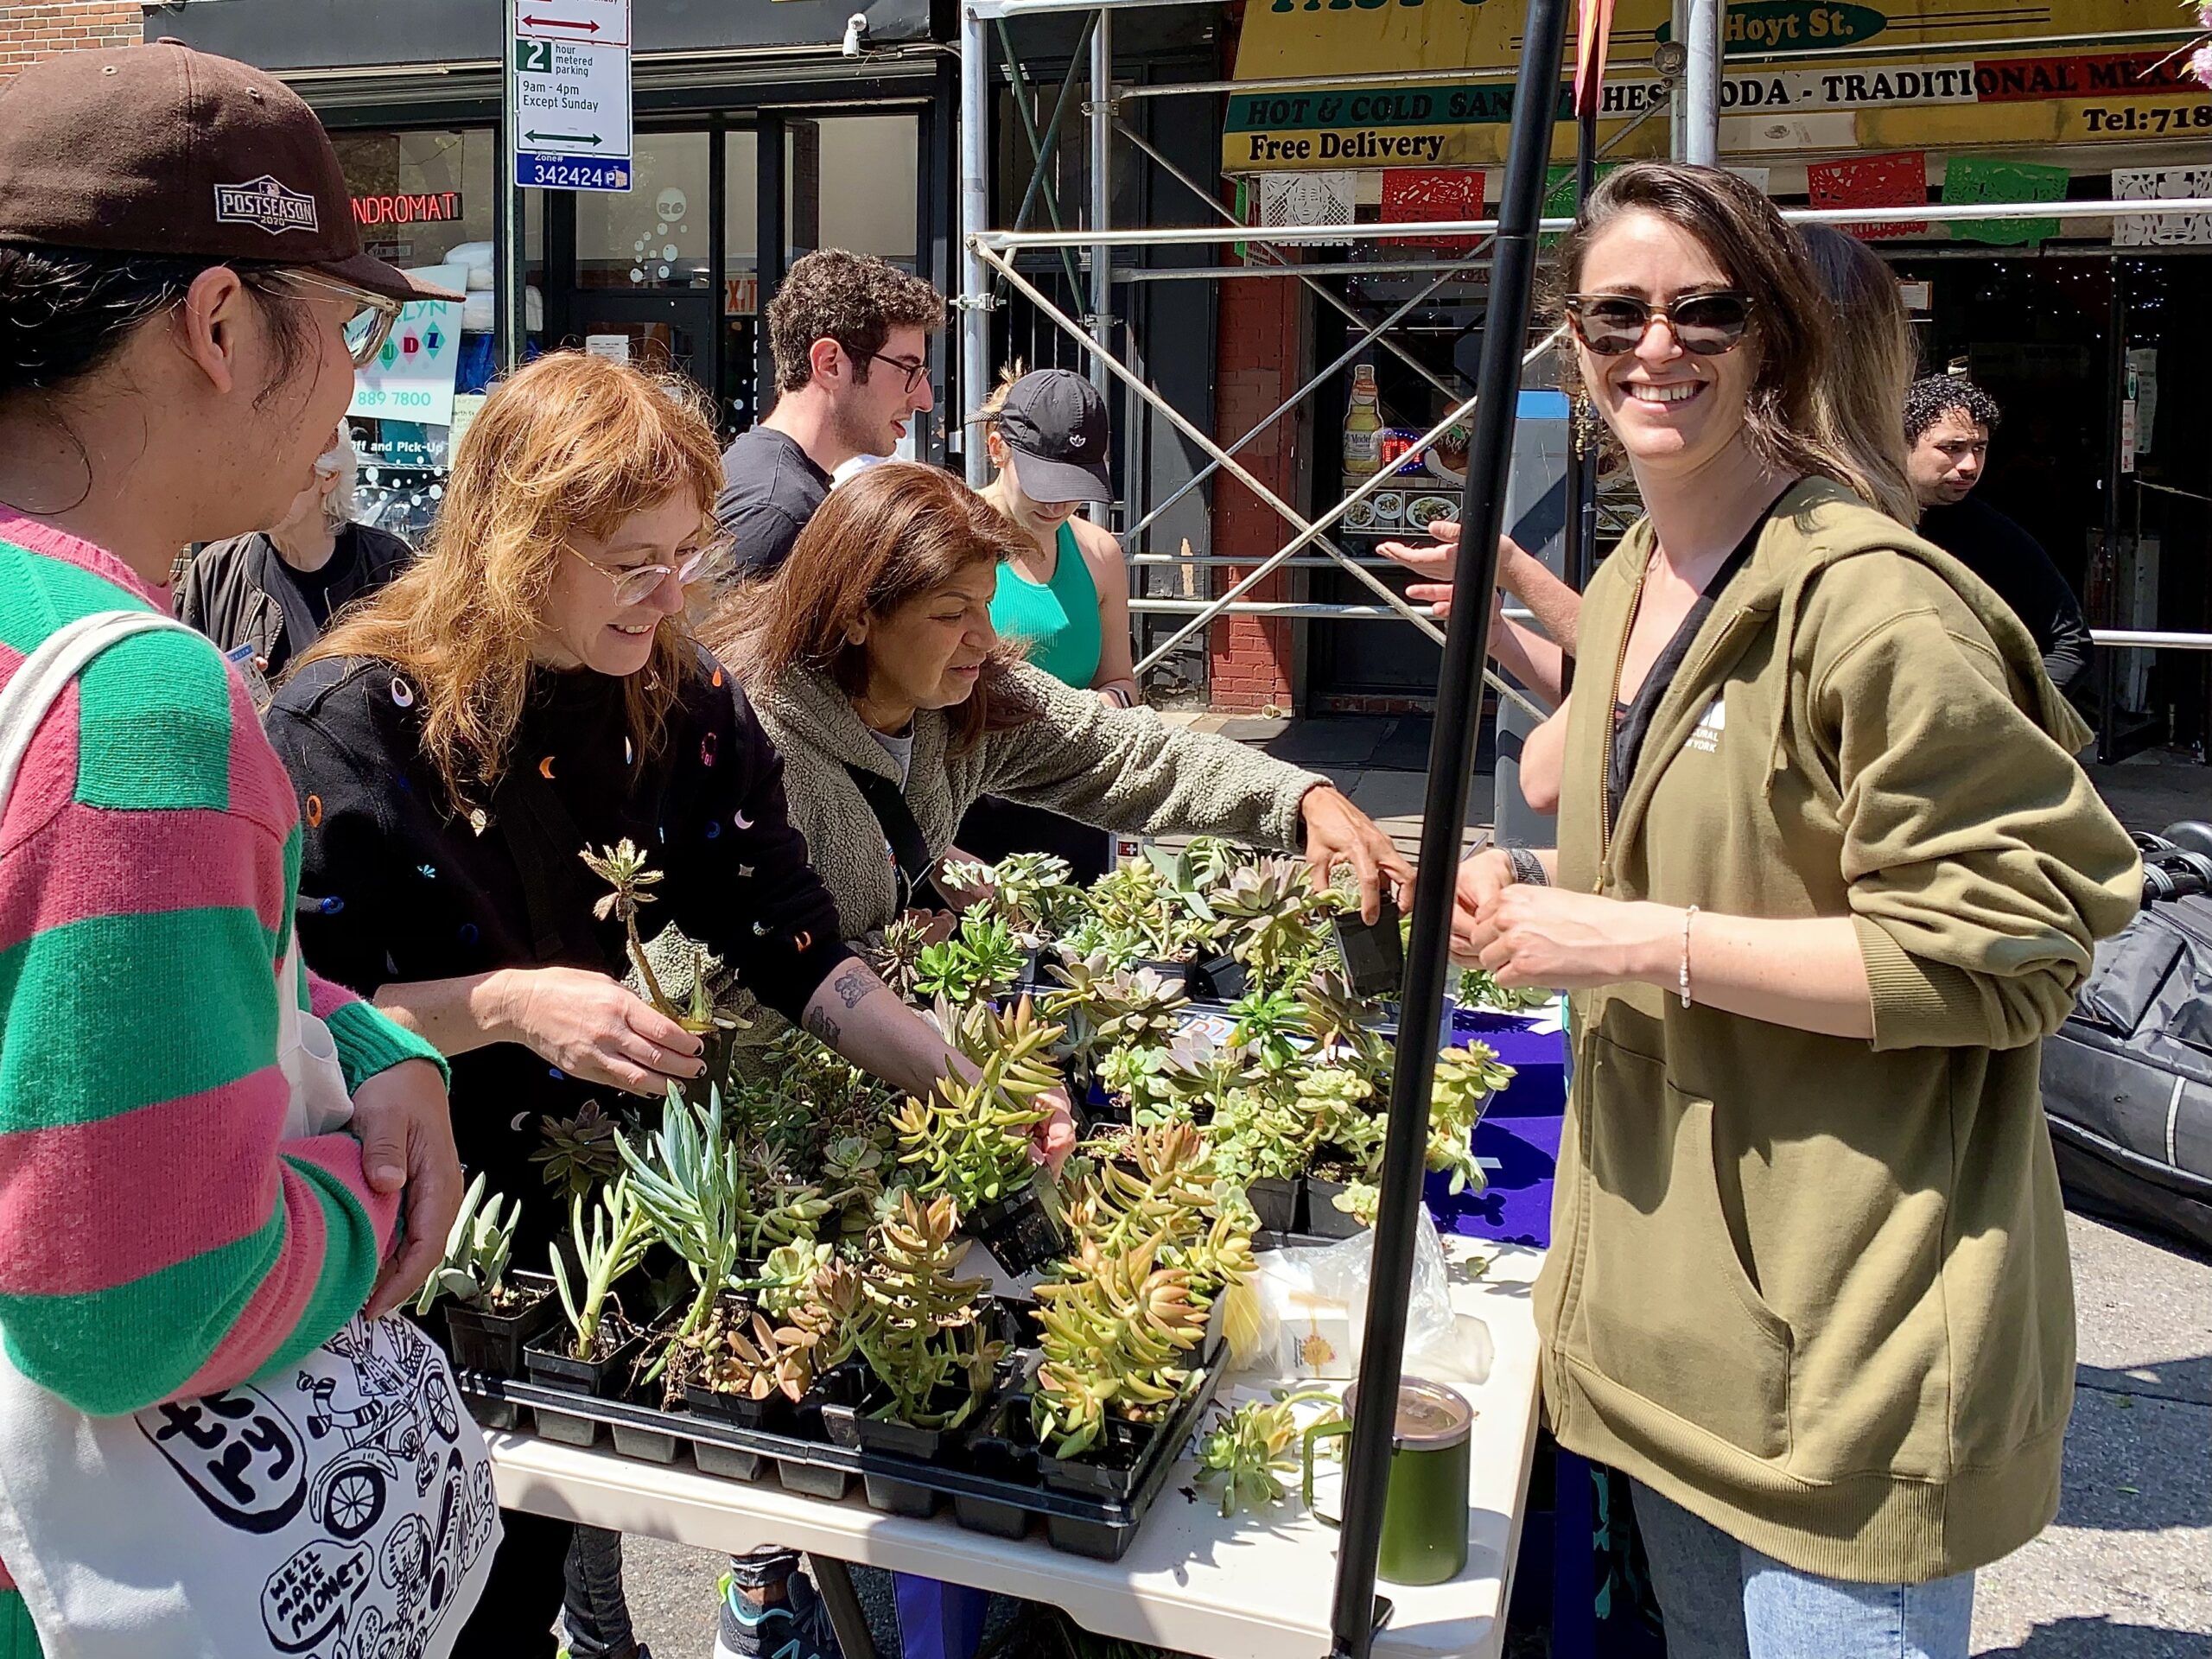 On Hoyt Street between State Street and Atlantic Avenue, The Hort gave away free plants.